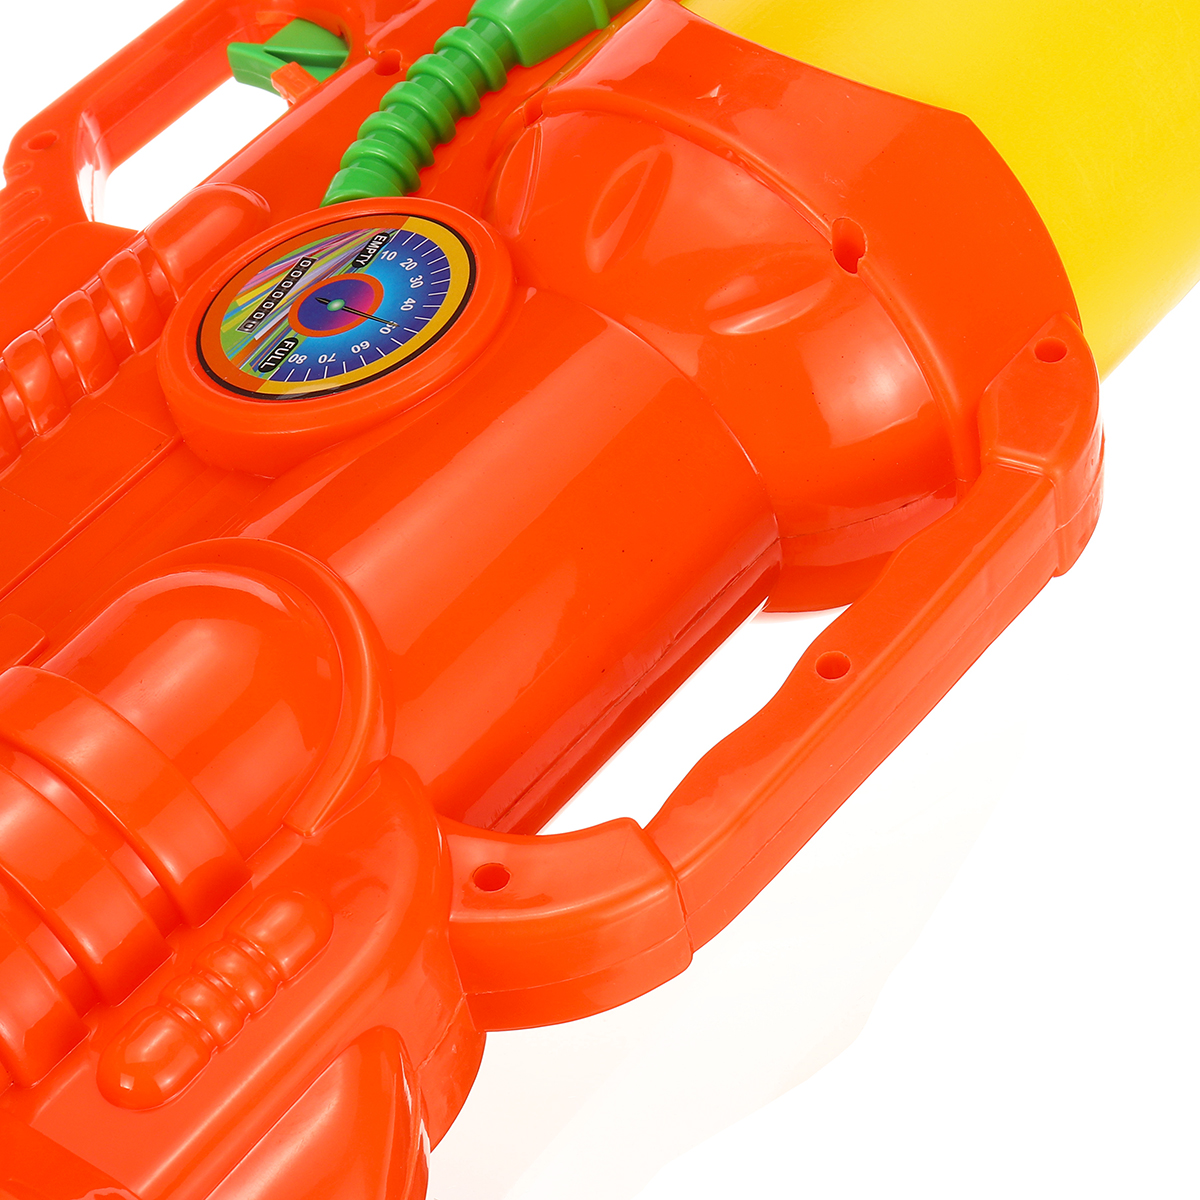 1500ml-Red-Or-Blue-Toy-Water-Sprinkler-With-A-Range-Of-7-9m-Plastic-Water-Sprinkler-For-Children-Bea-1703042-12